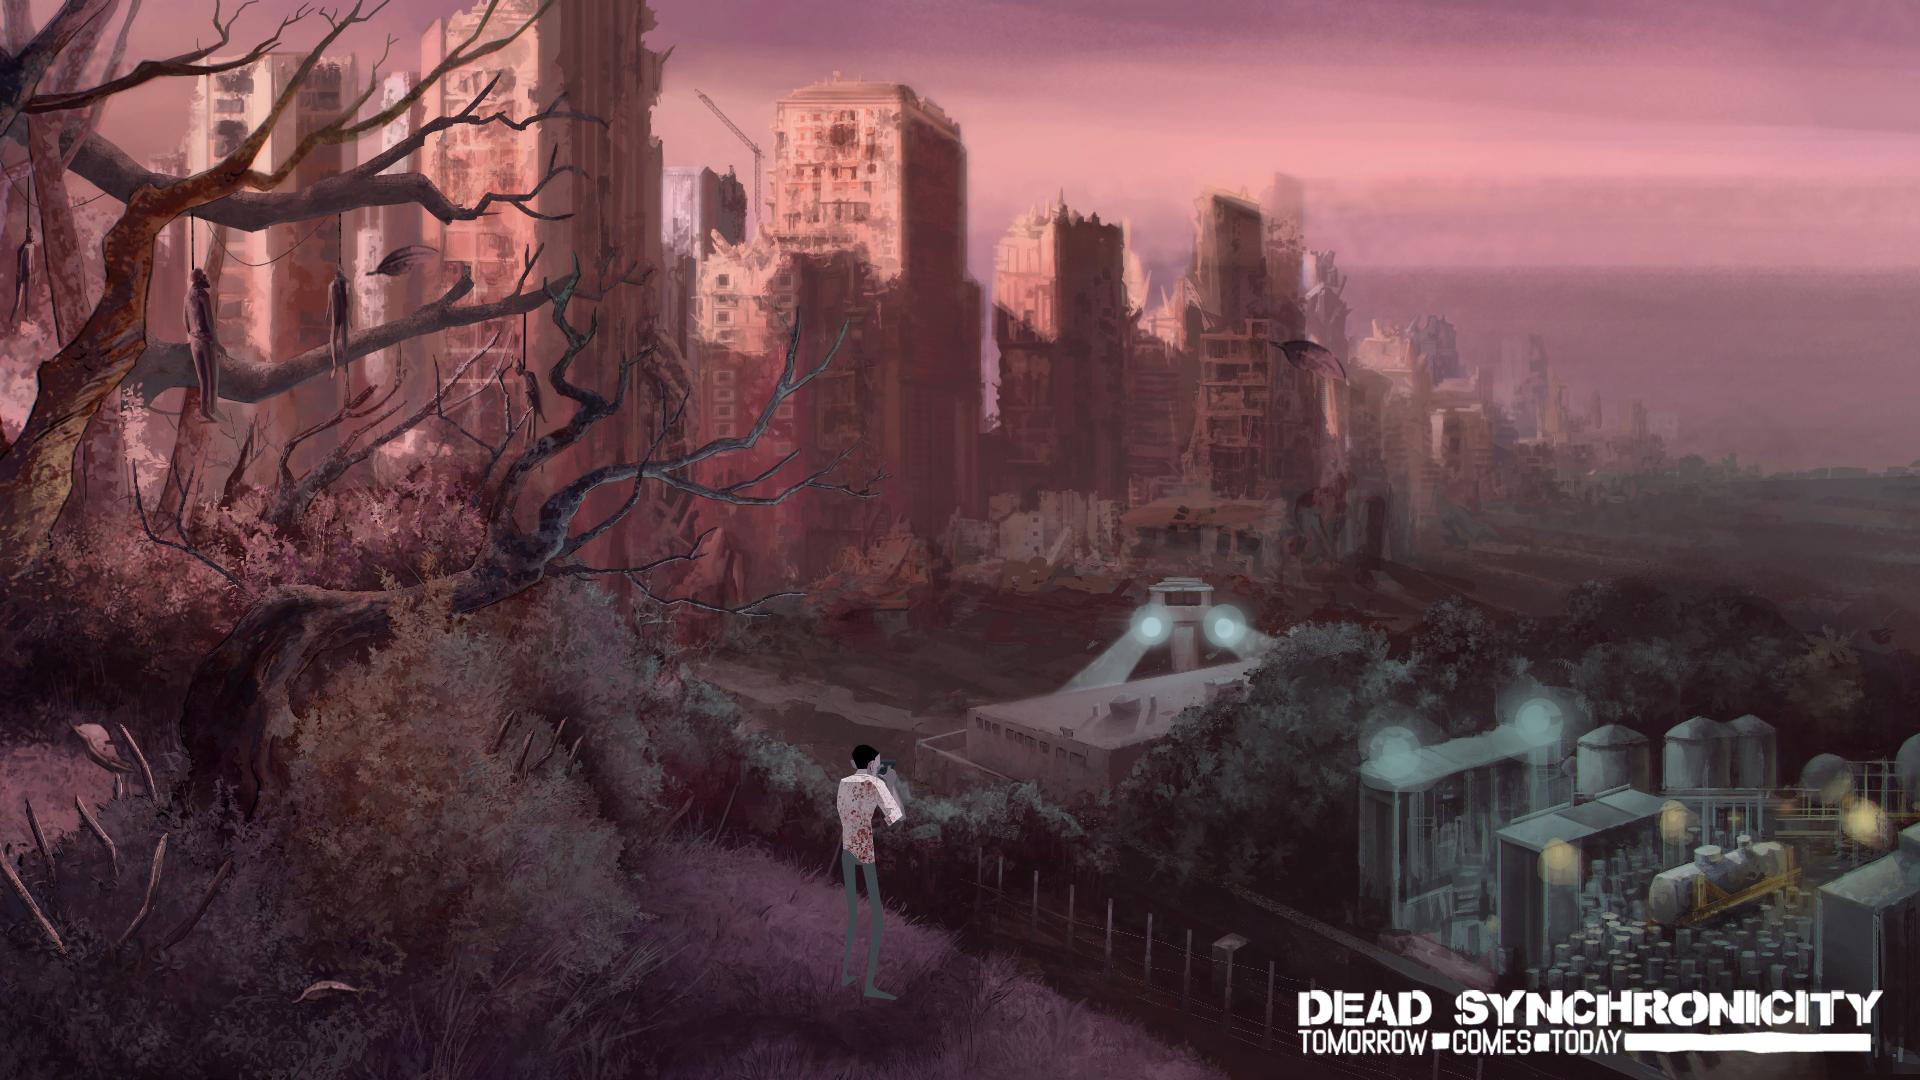 Dead Synchronicity: Tomorrow Comes Today HD wallpapers, Desktop wallpaper - most viewed